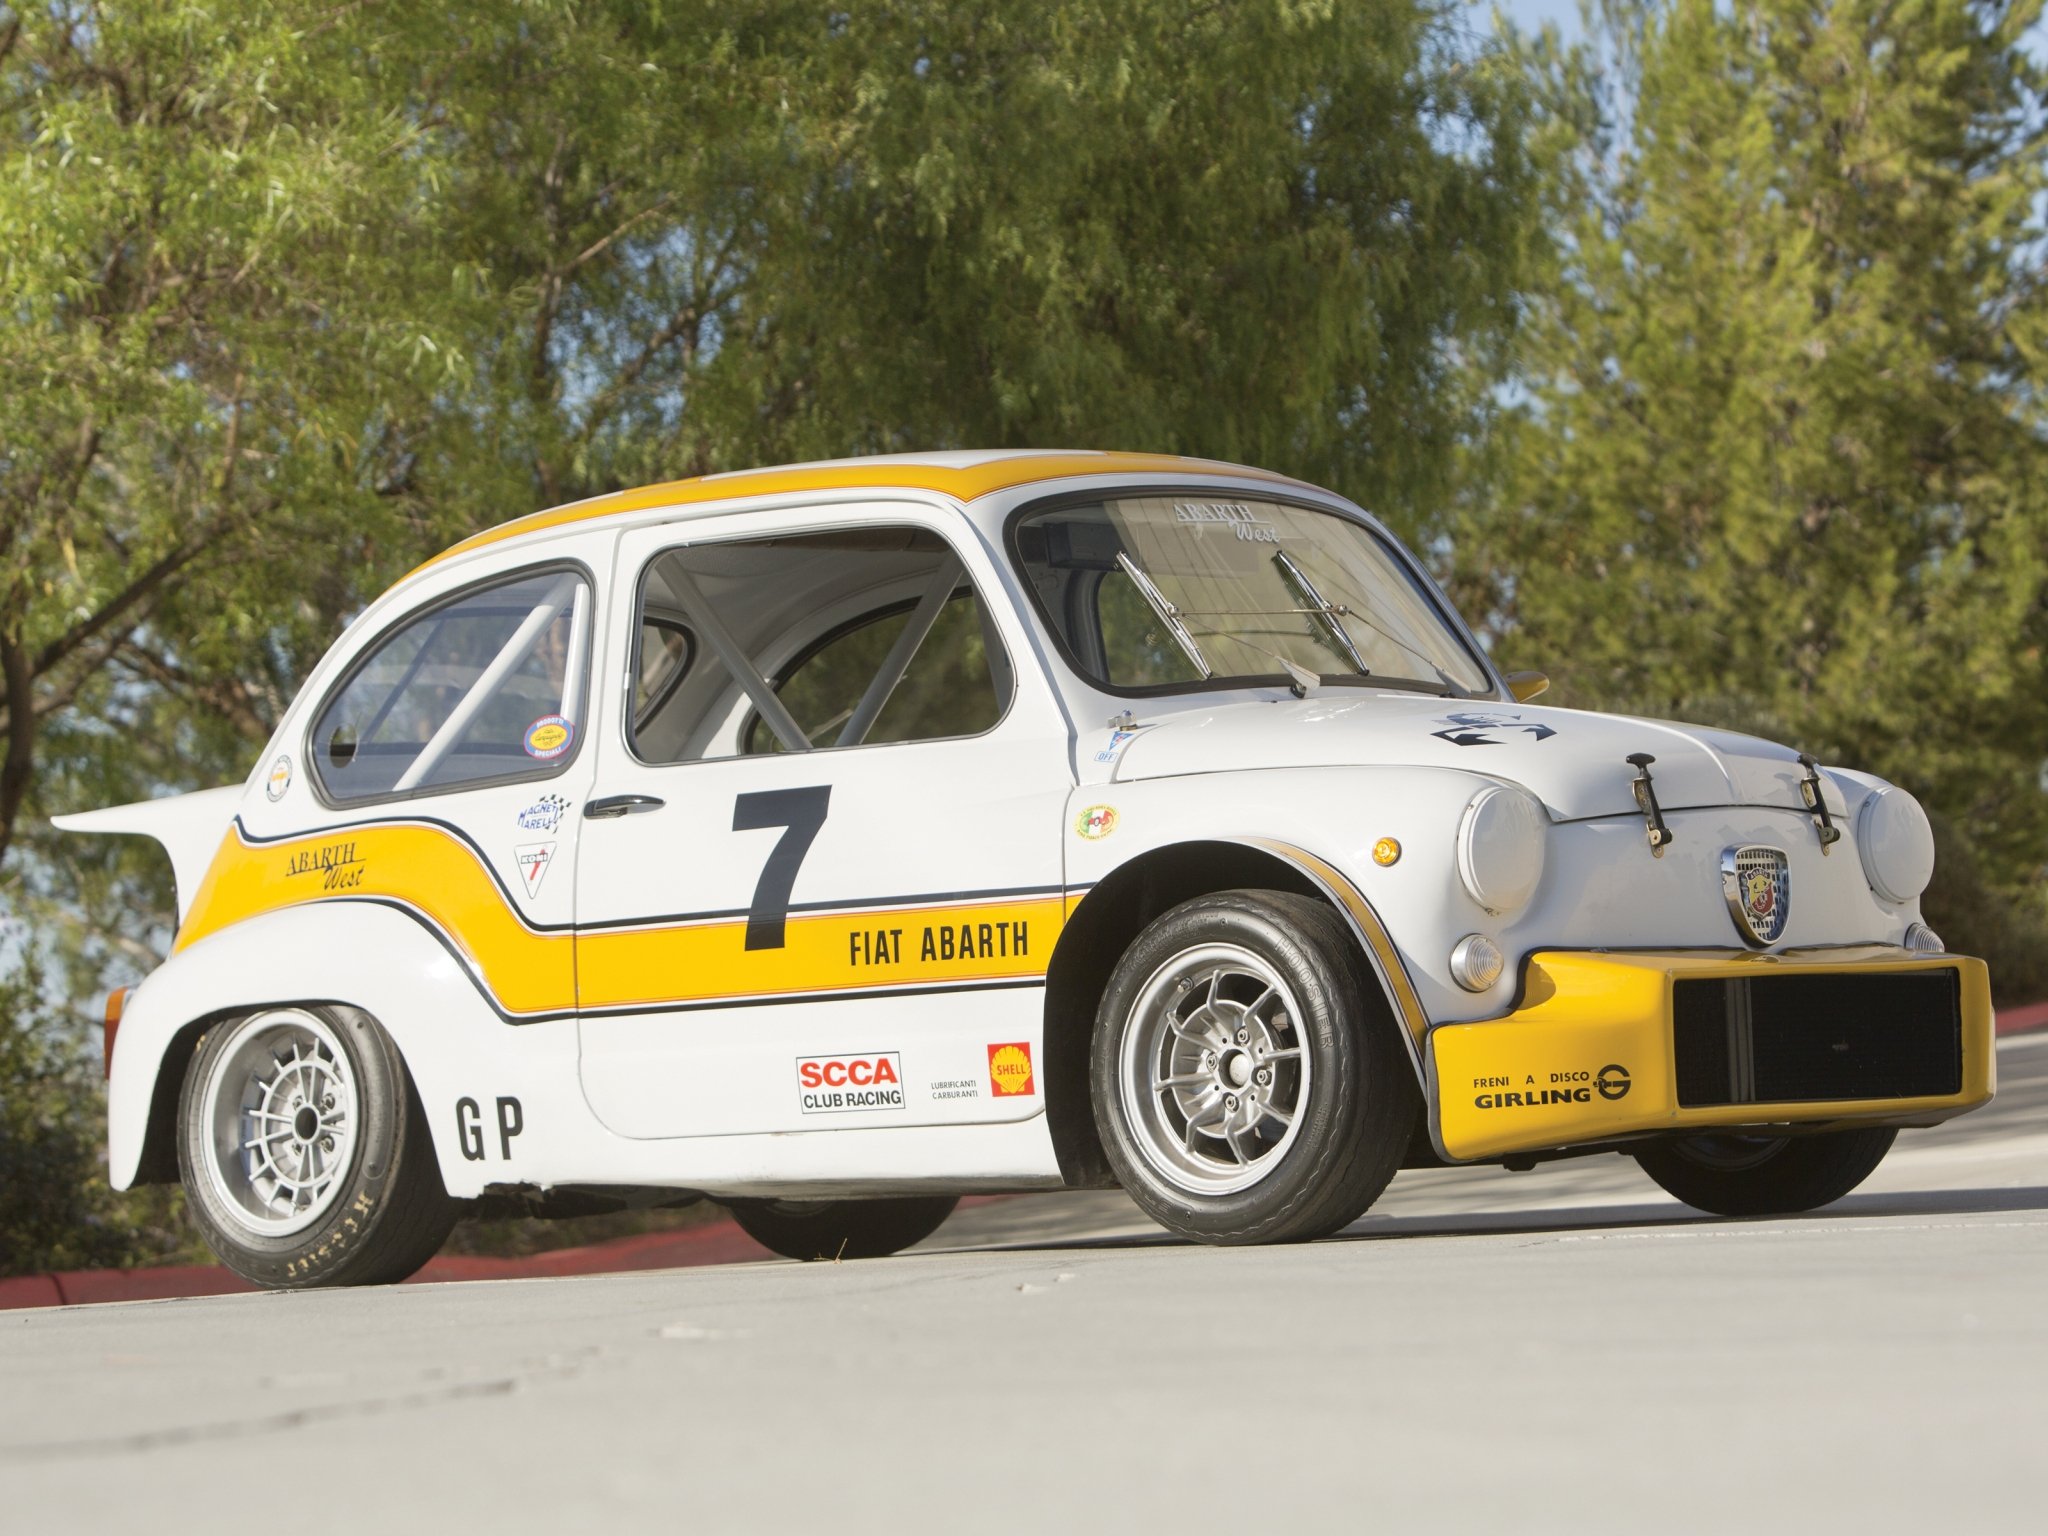 1970, Abarth, Fiat, 1000, Tcr, Group 2, Race, Racing Wallpaper